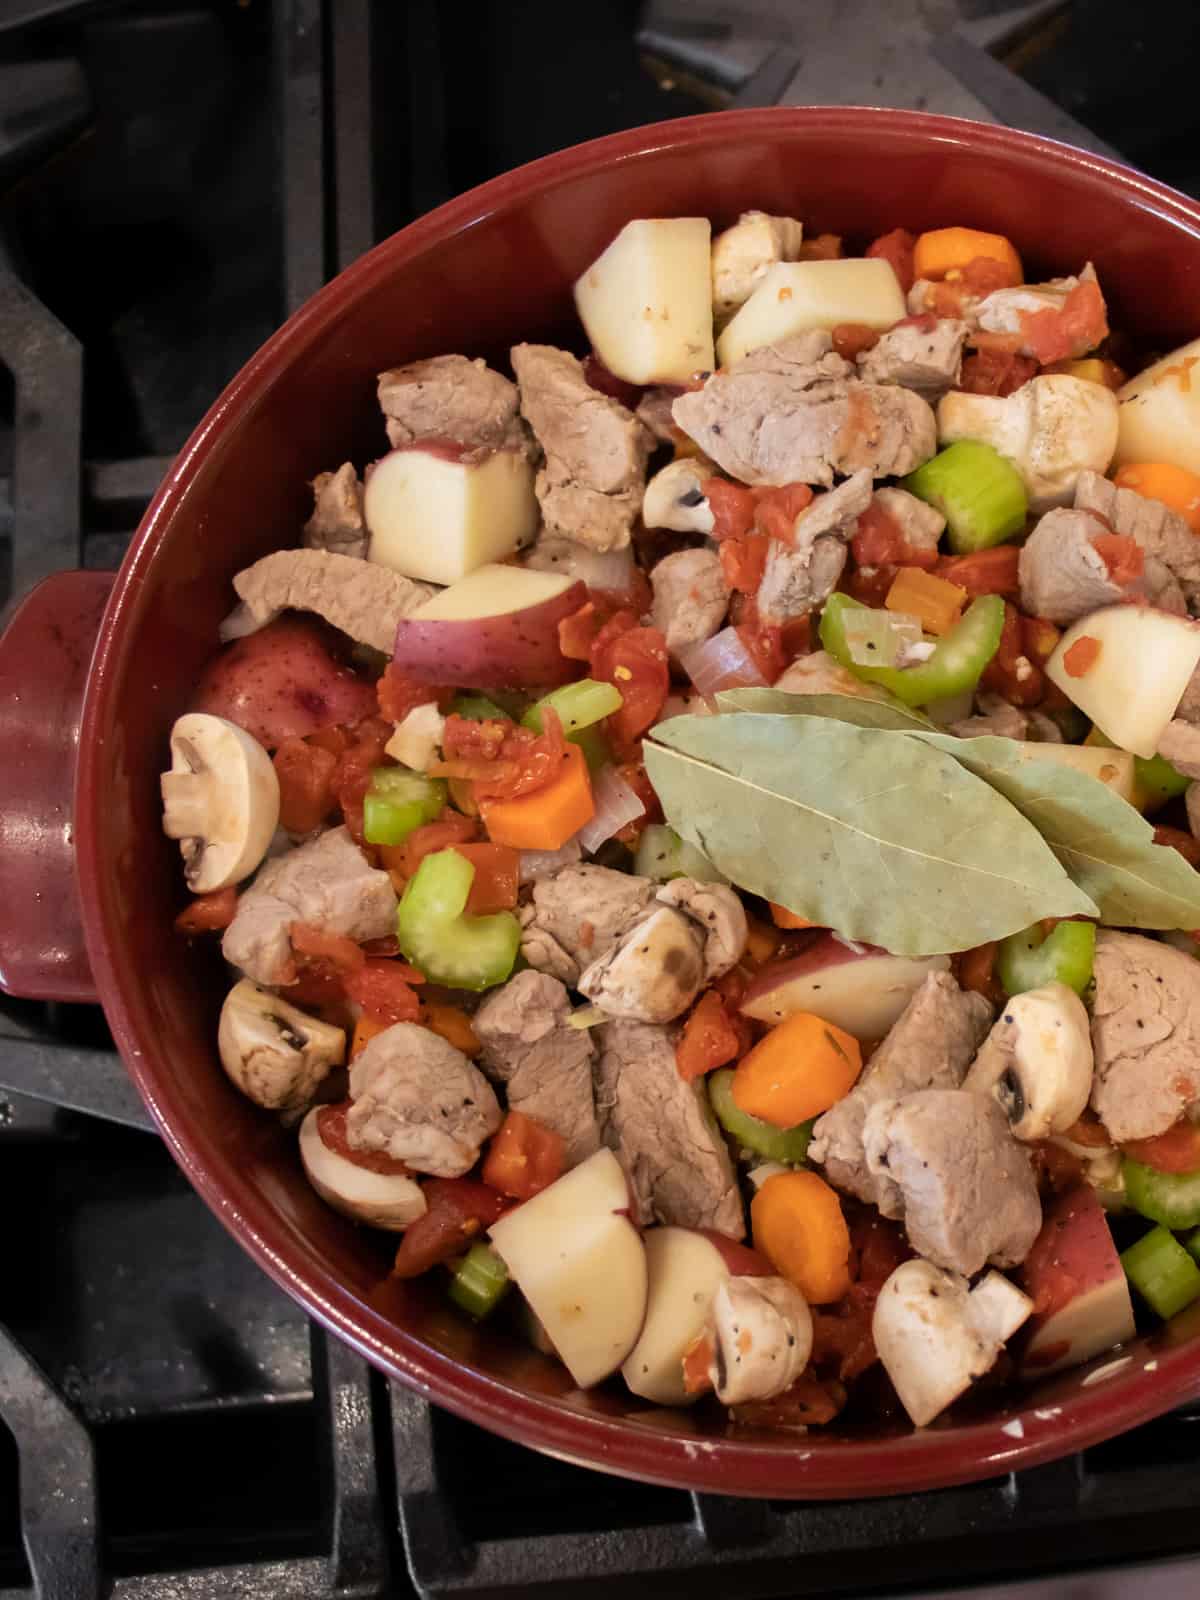 Overhead picture of a pot filled with uncooked stew.